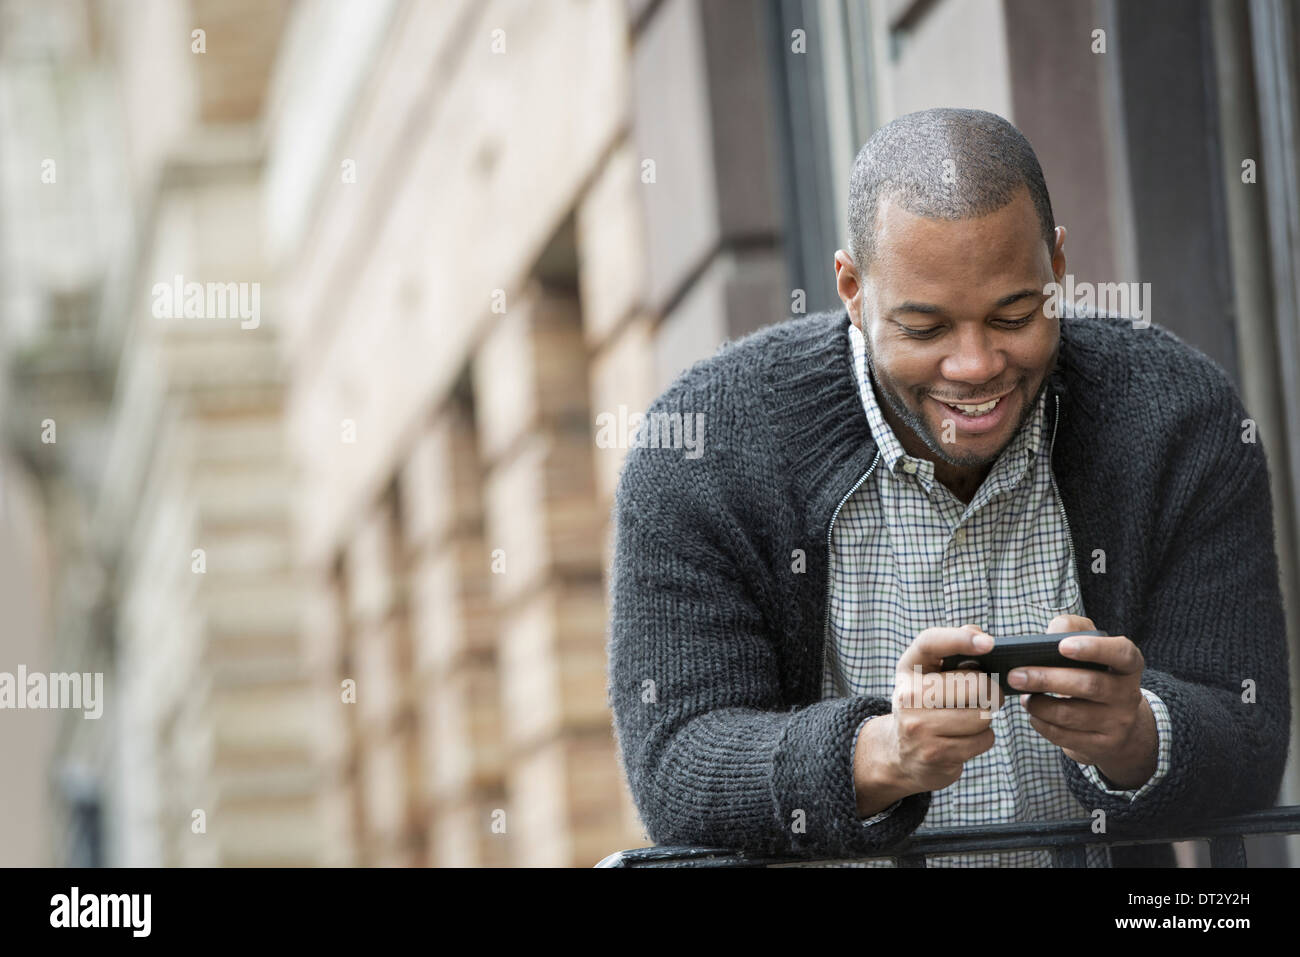 A young man checking his phone and texting Stock Photo